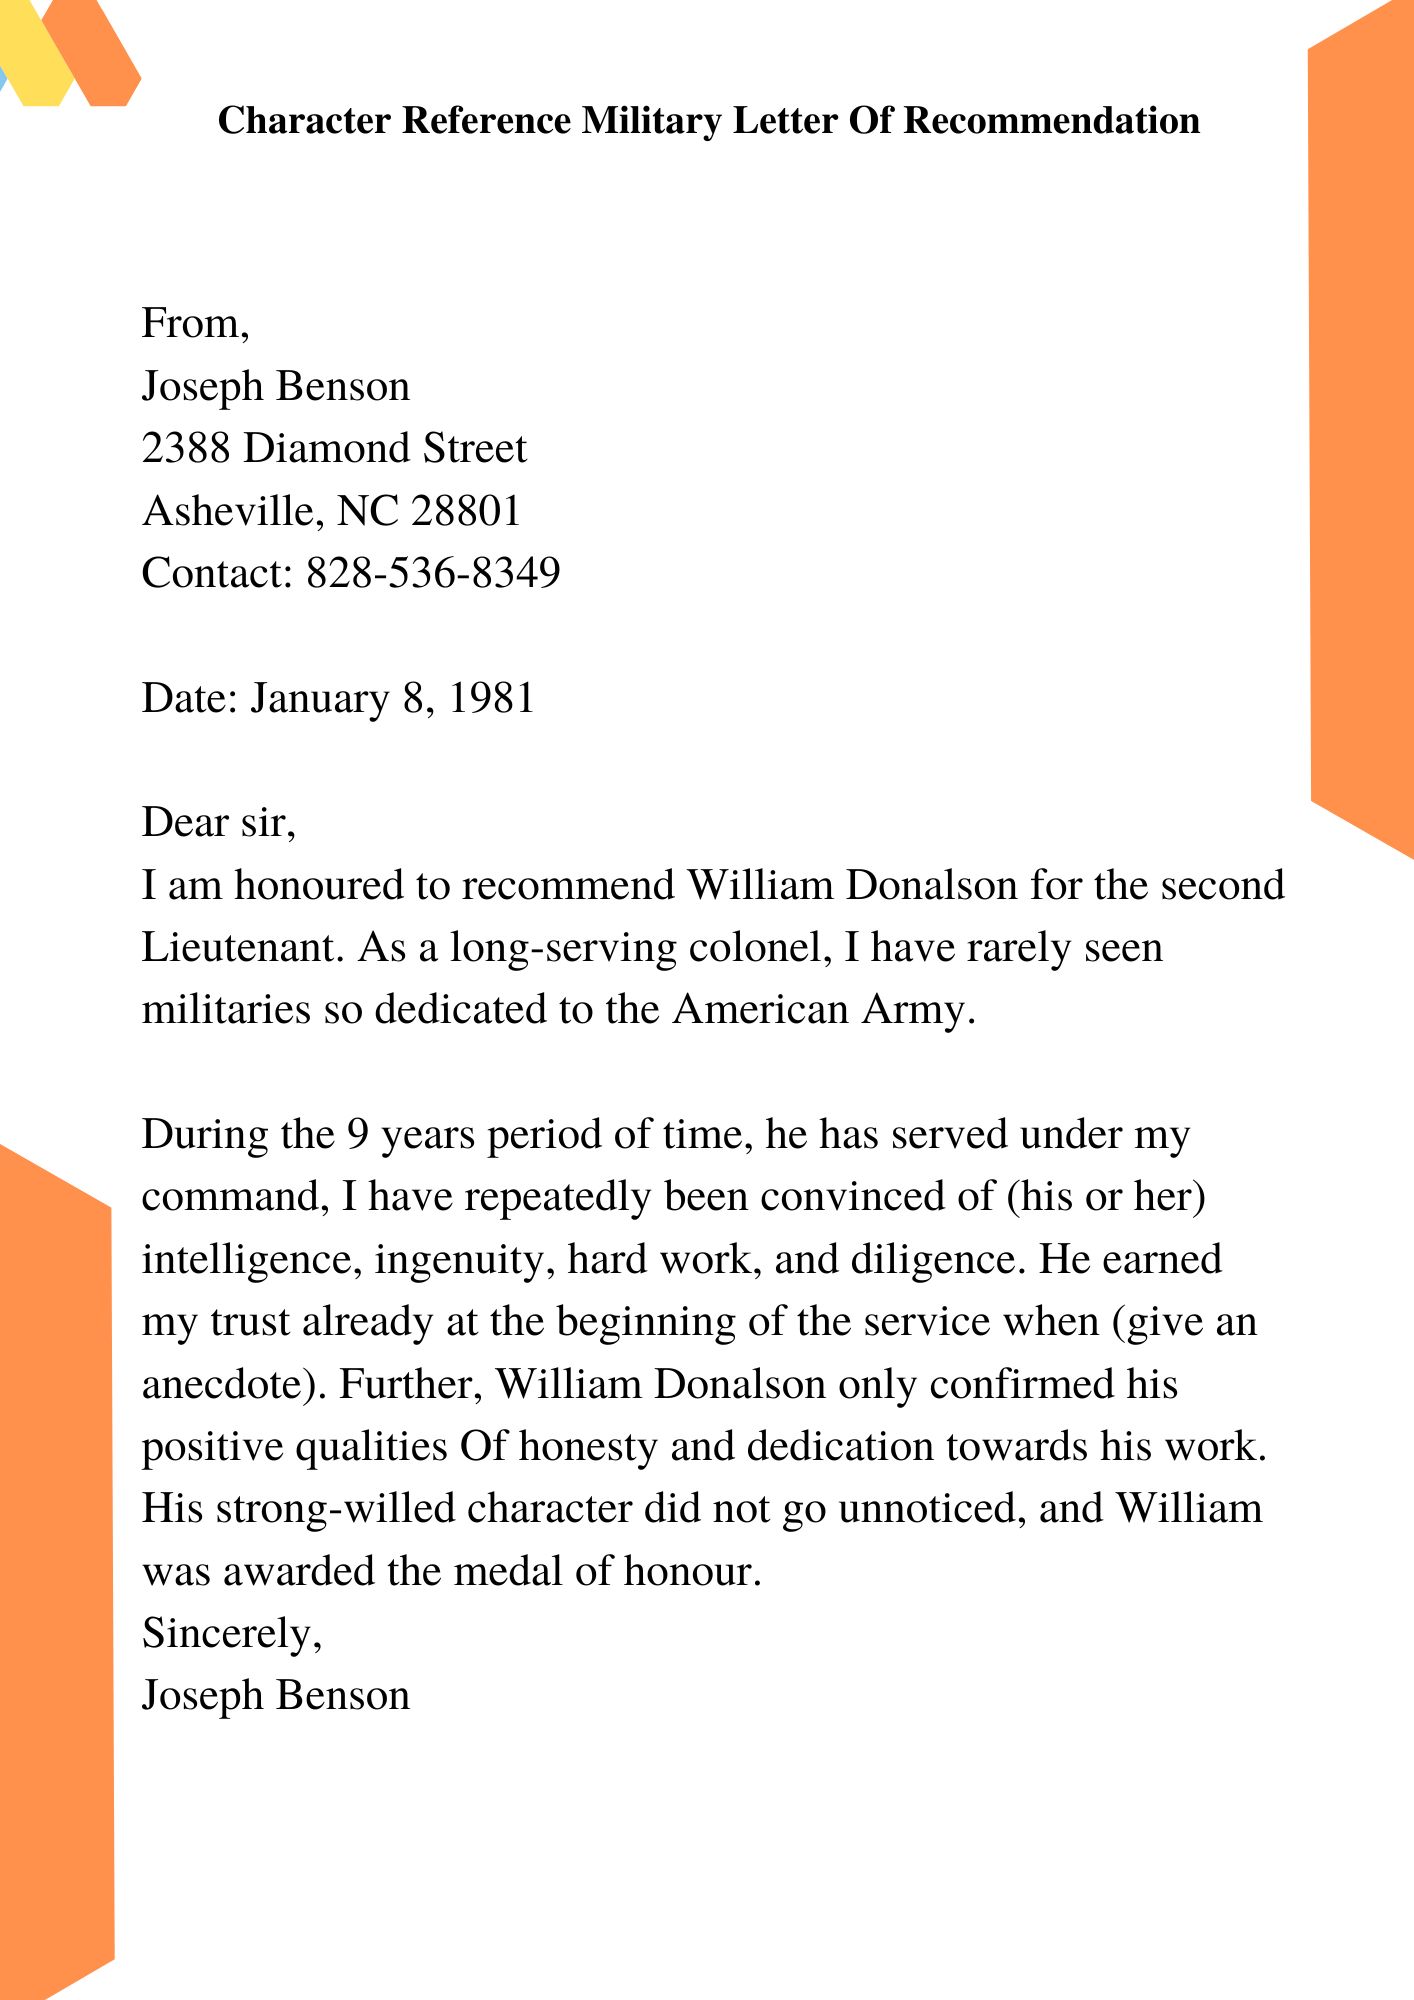 Good Moral Character Military Character Reference Letter 